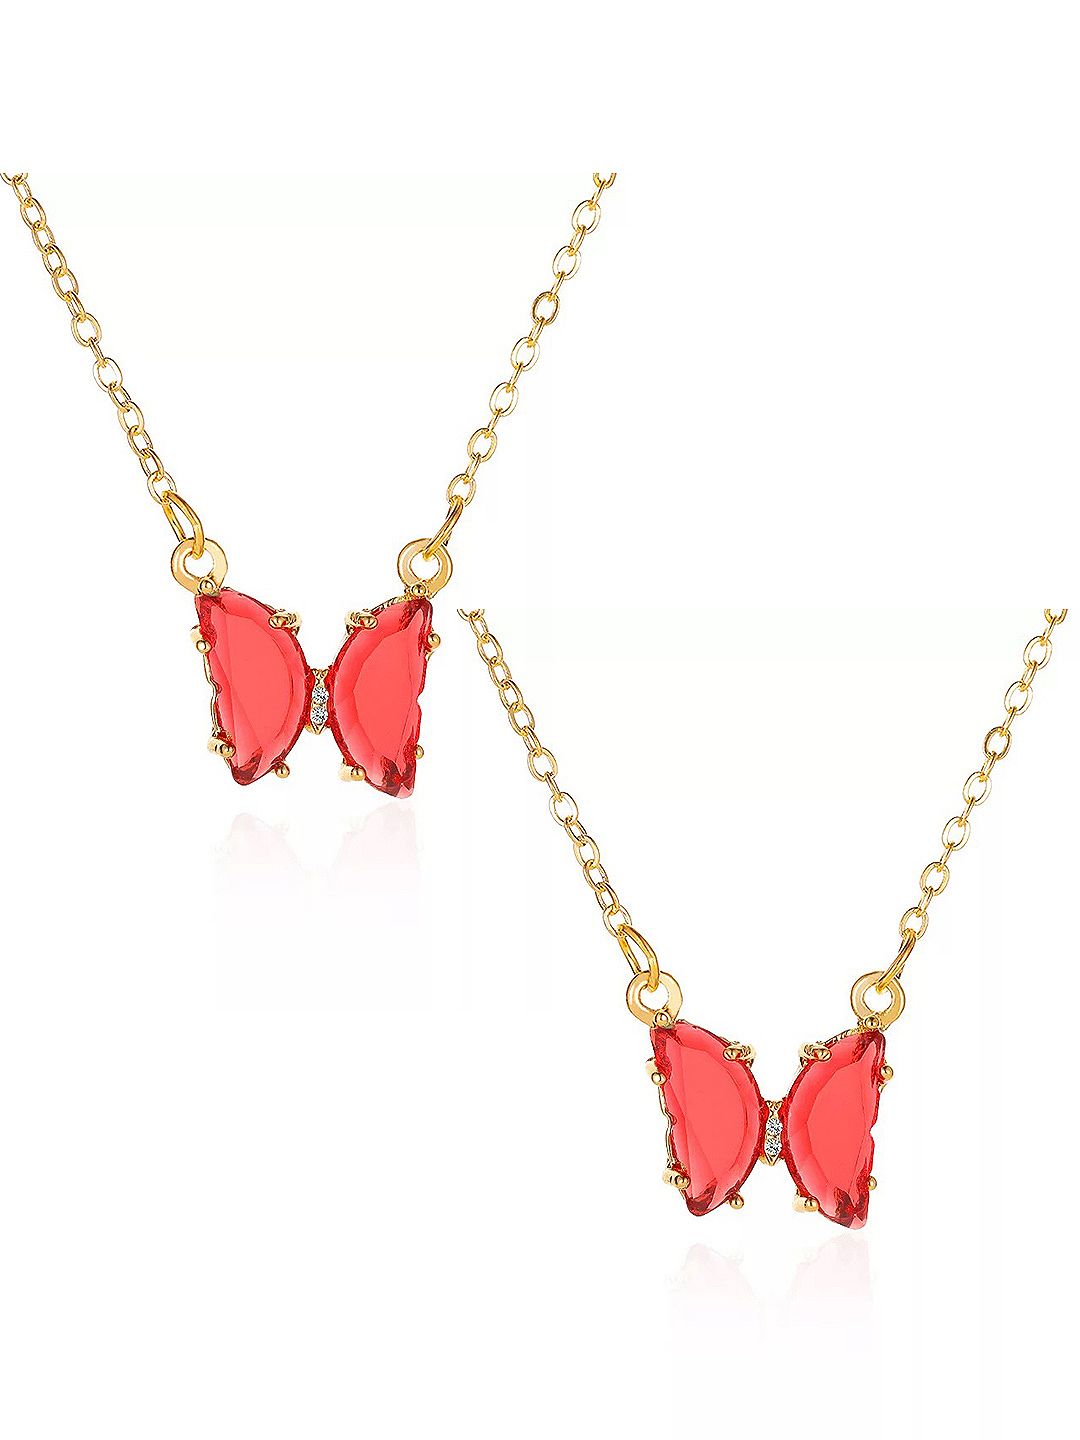 Vembley Set of 2 Gold-Toned & Red Crystal Butterfly Gold-Plated Necklace Price in India